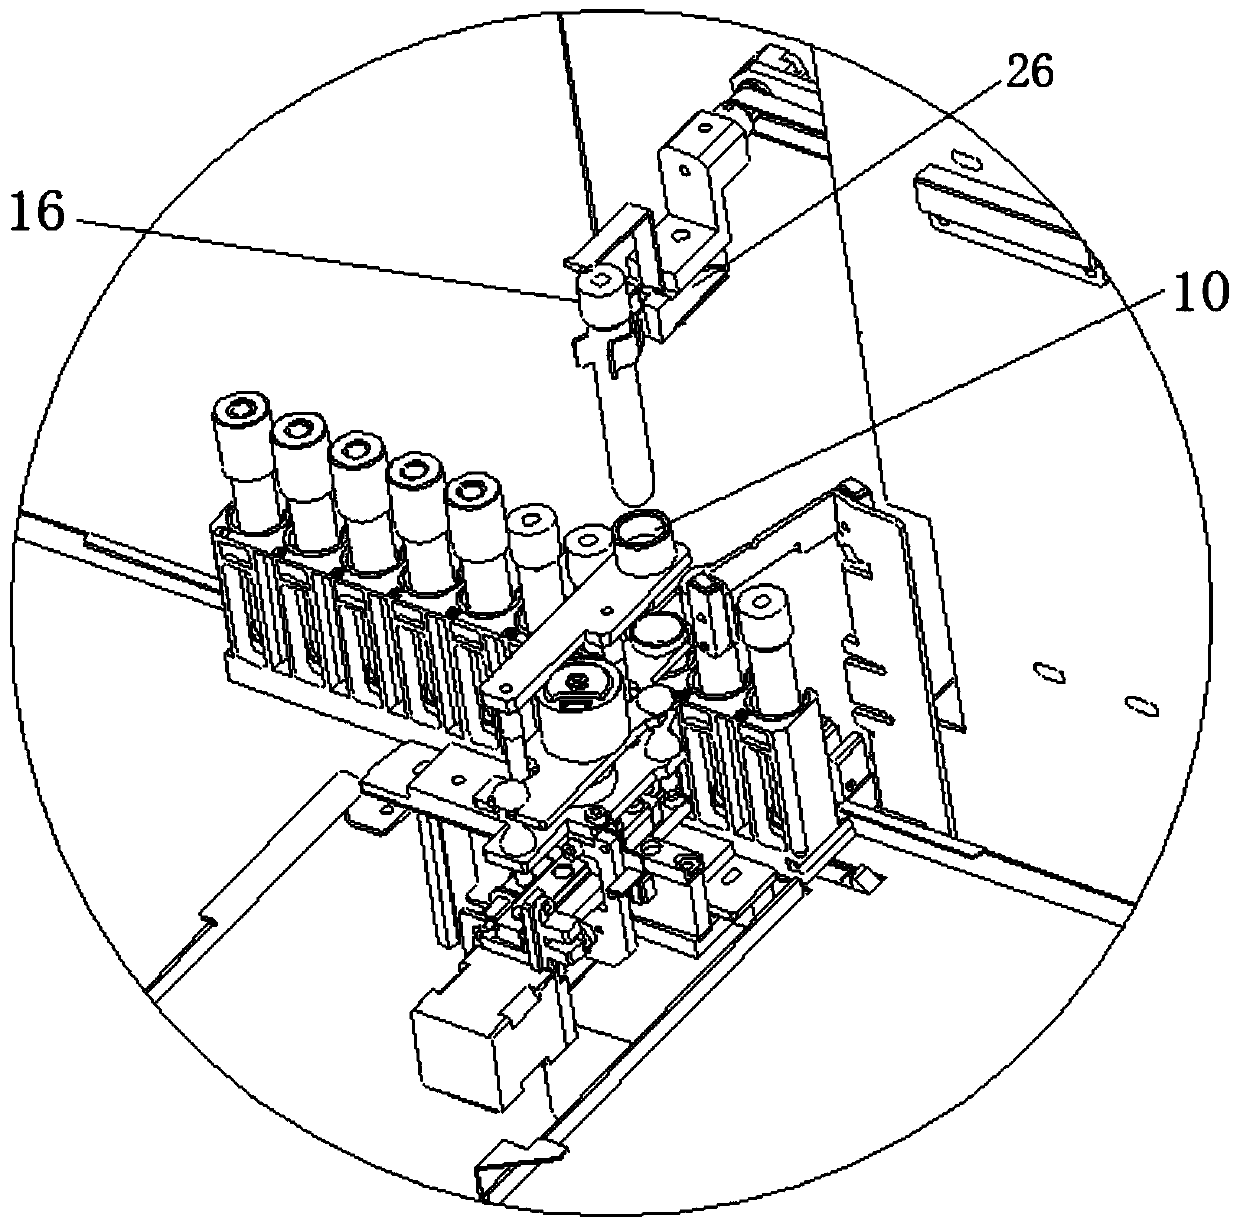 Automatic blood sample blending device and blood cell analysis device